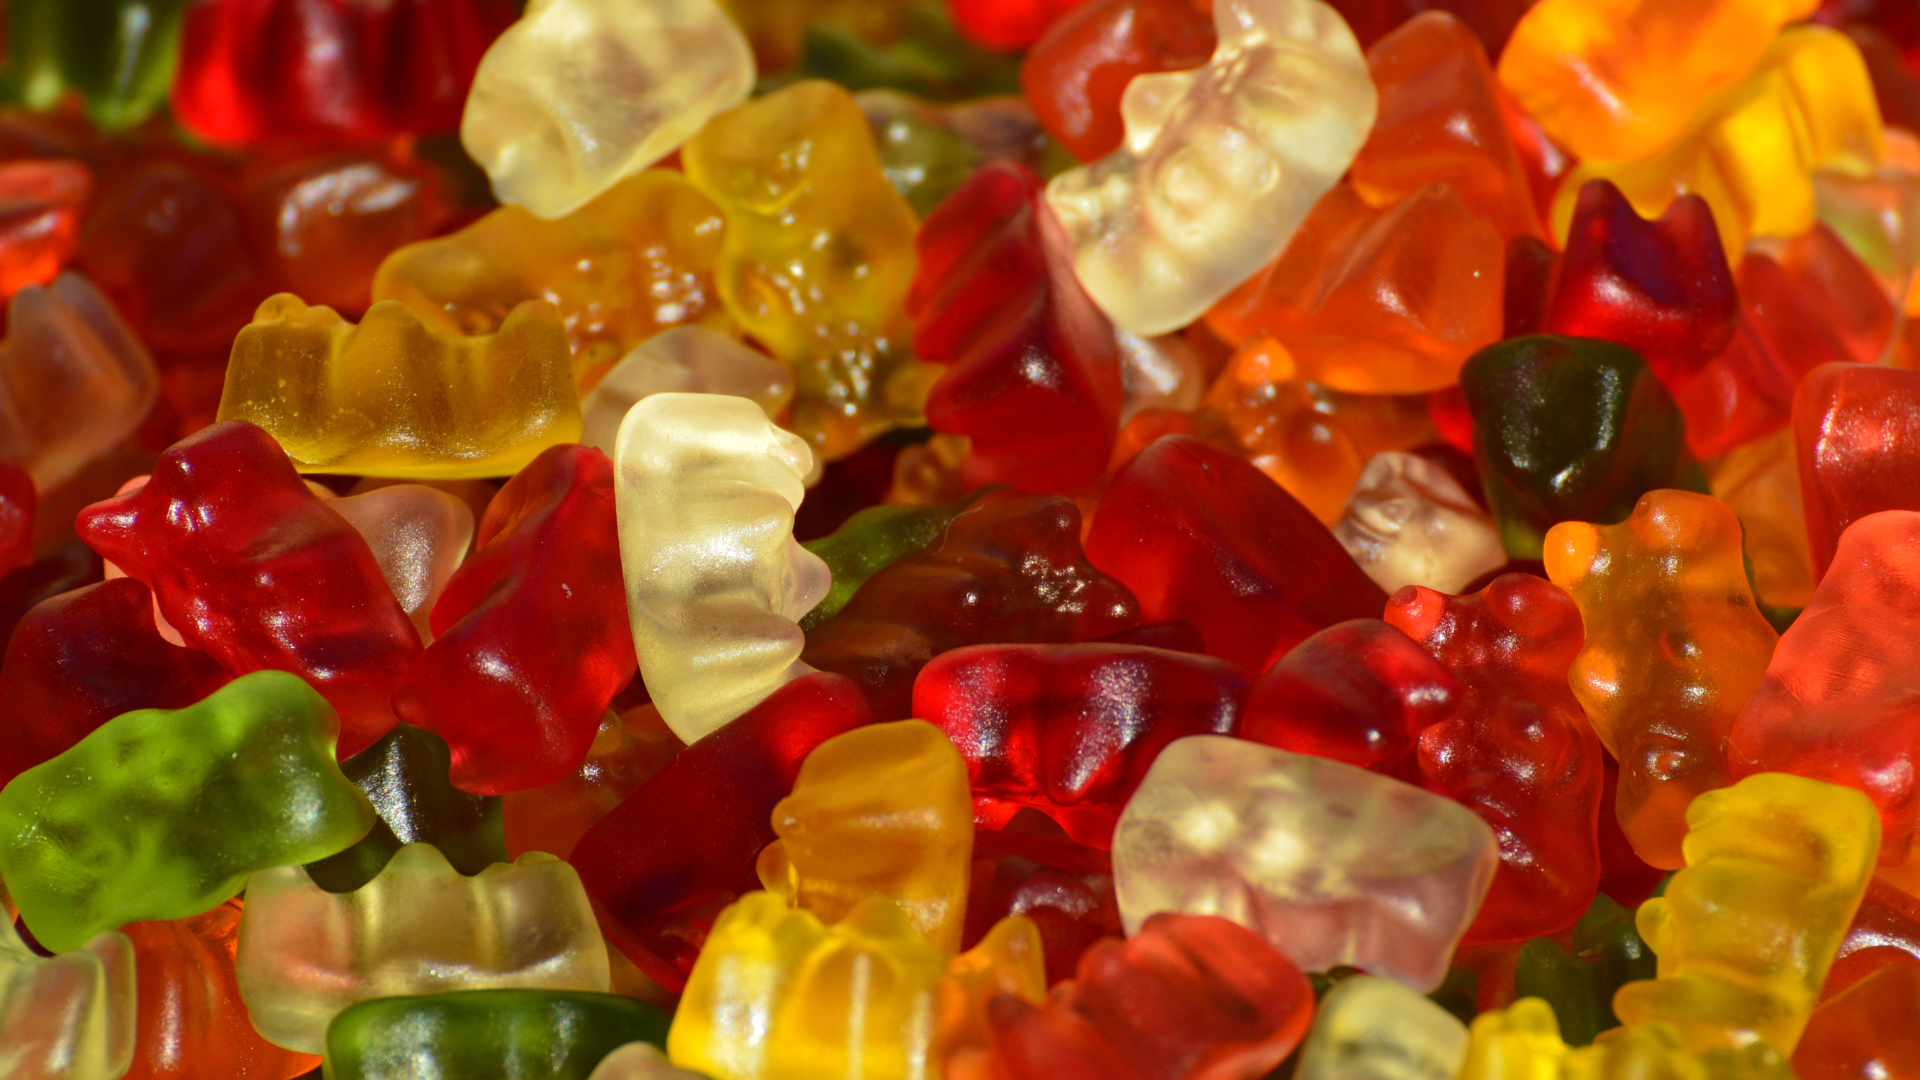 Electrolyte Gummies: A Tasty Way to Stay Hydrated